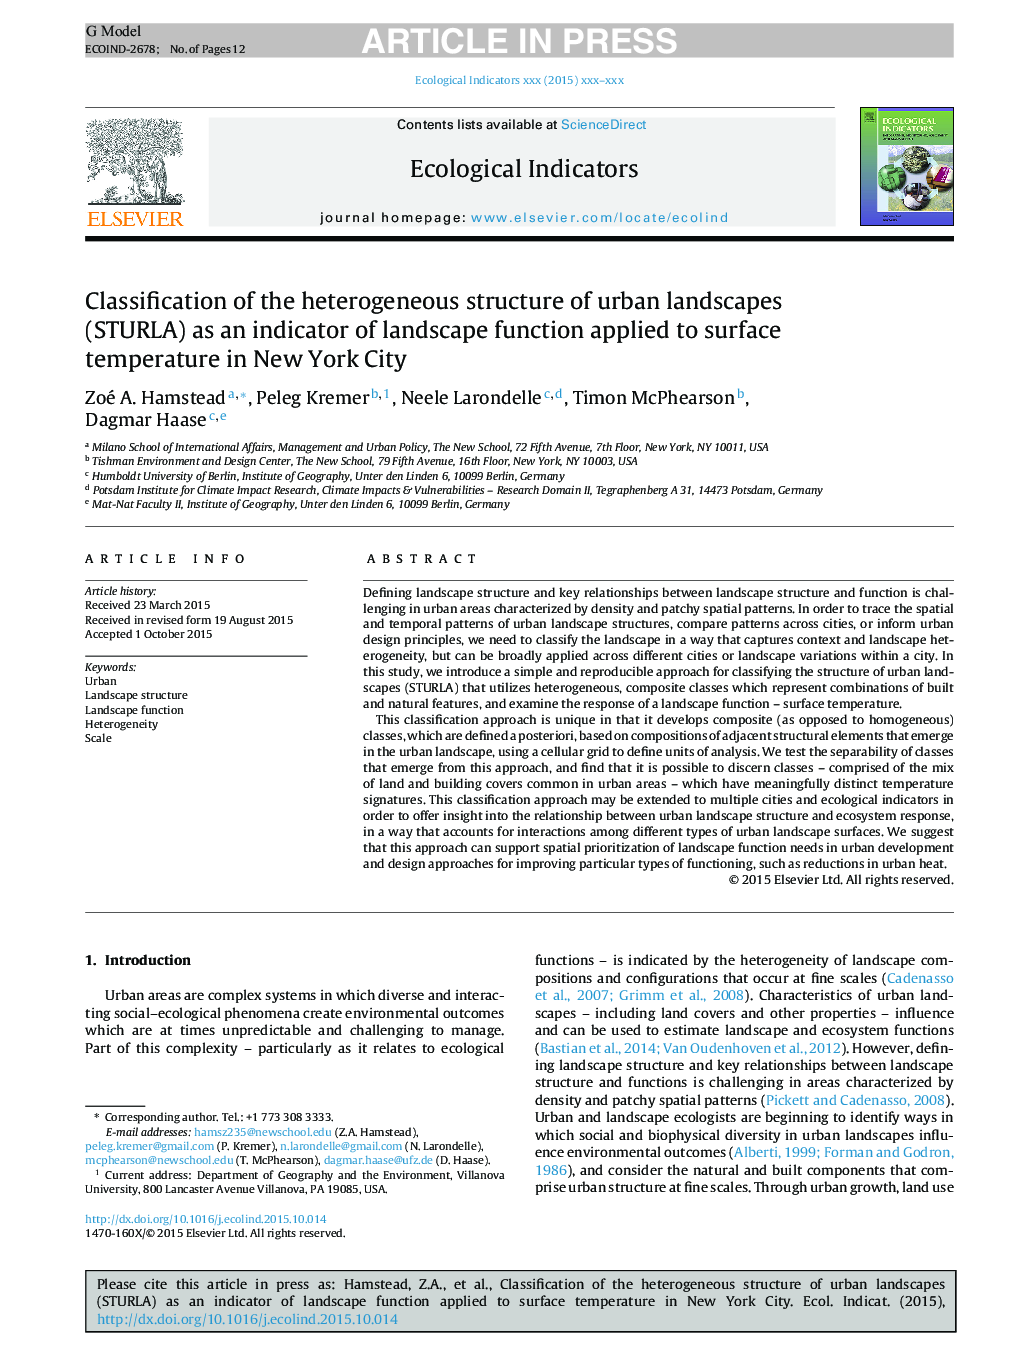 Classification of the heterogeneous structure of urban landscapes (STURLA) as an indicator of landscape function applied to surface temperature in New York City